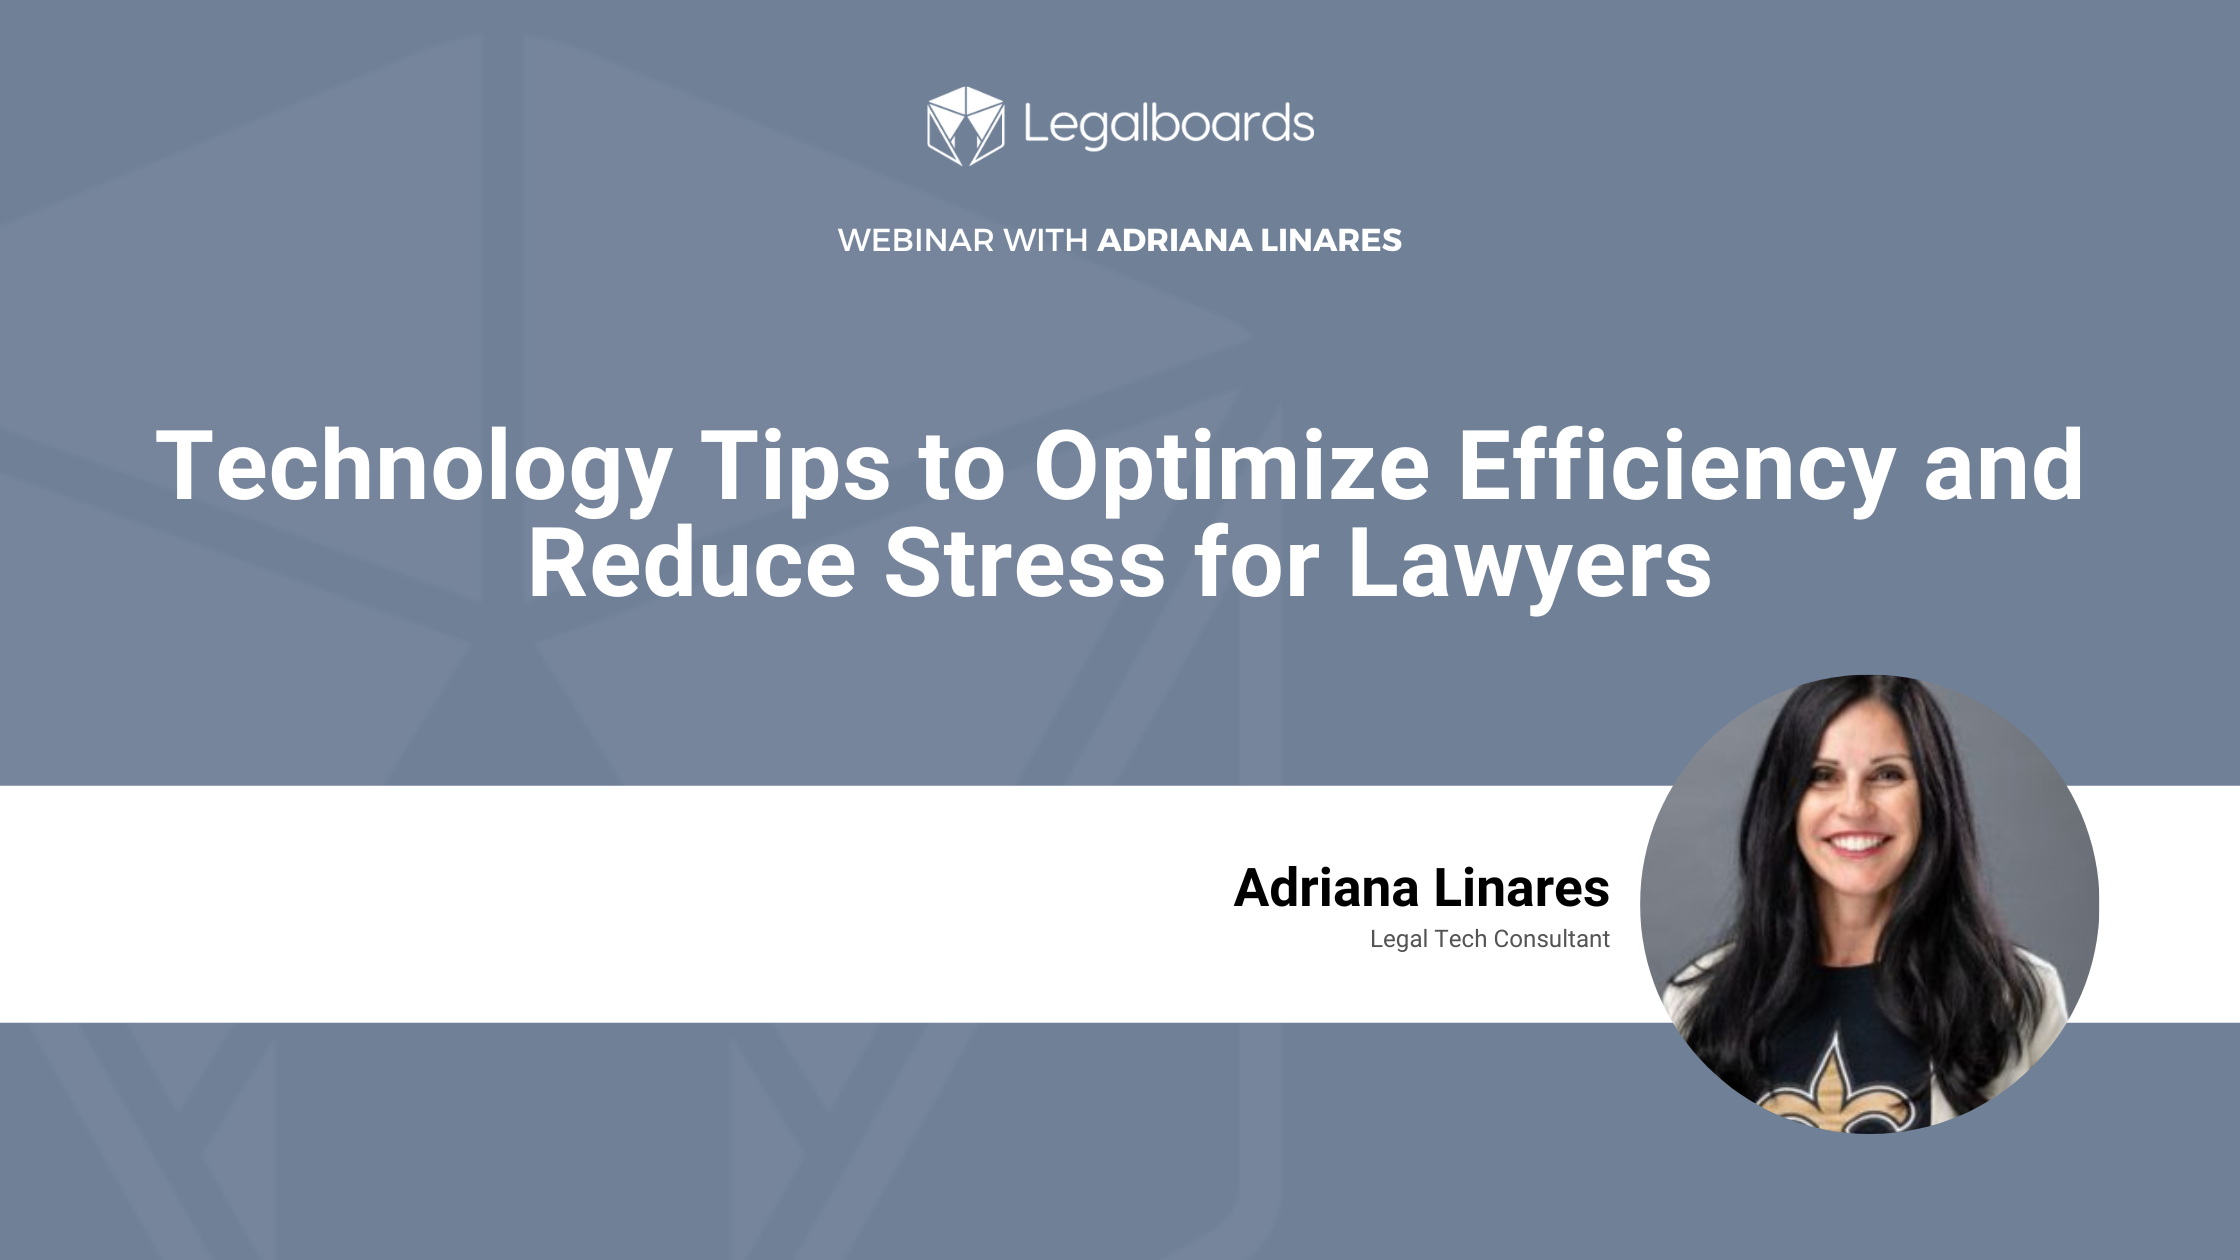 Technology tips to optimize efficiency and reduce stress for lawyers